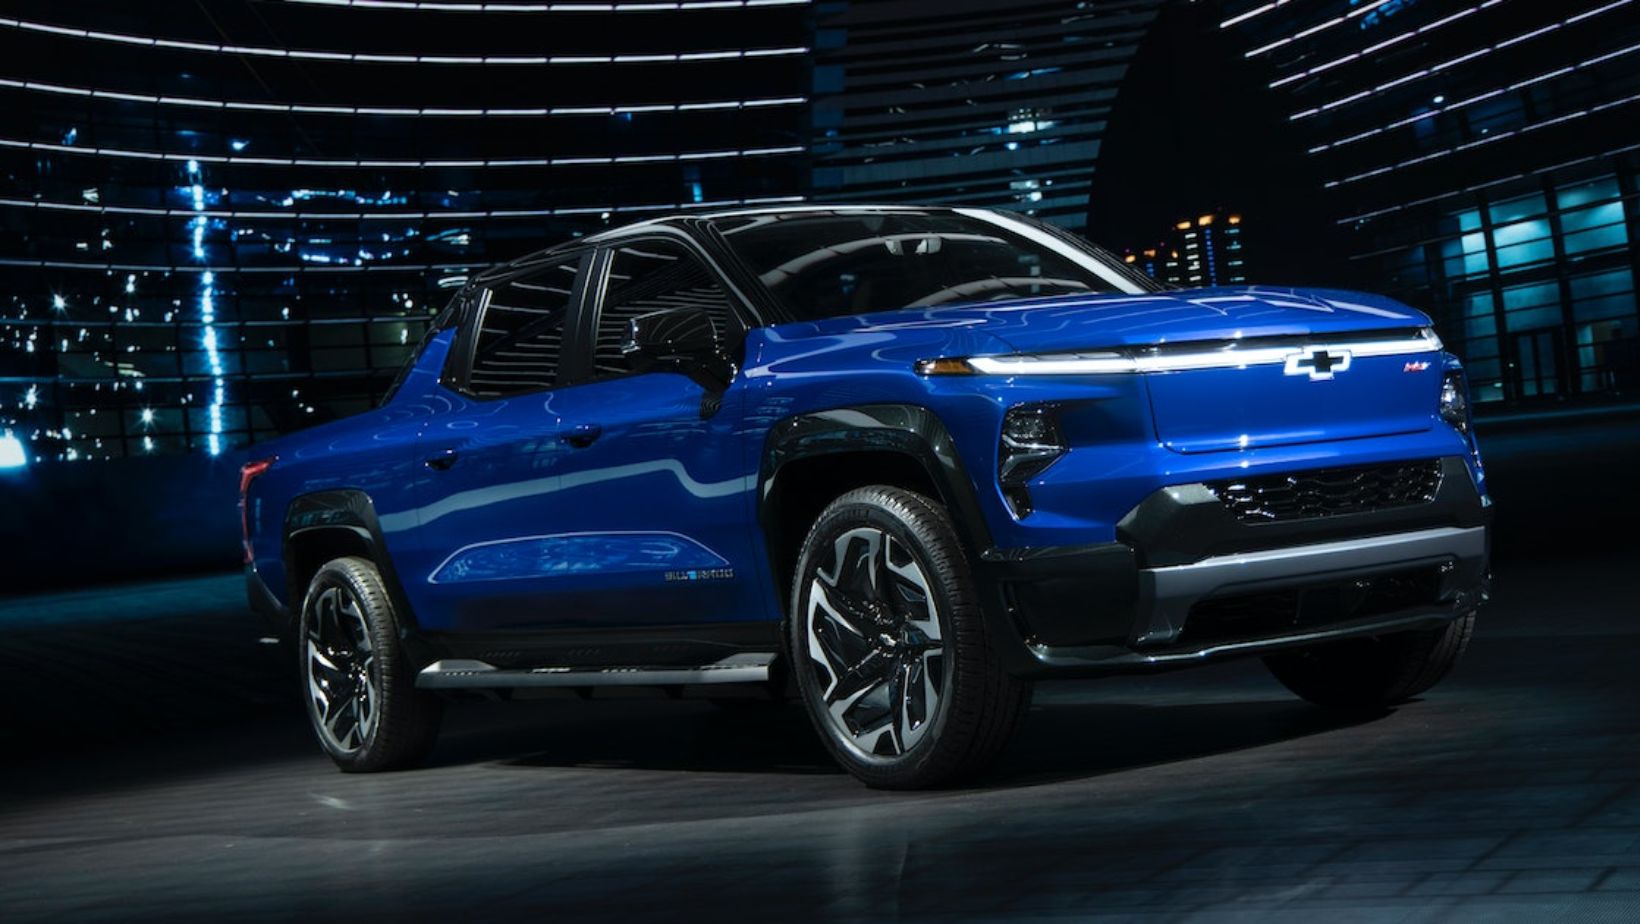 Chevrolet Silverado Electric: Price, Launch Date, Image, Top Speed, and Review